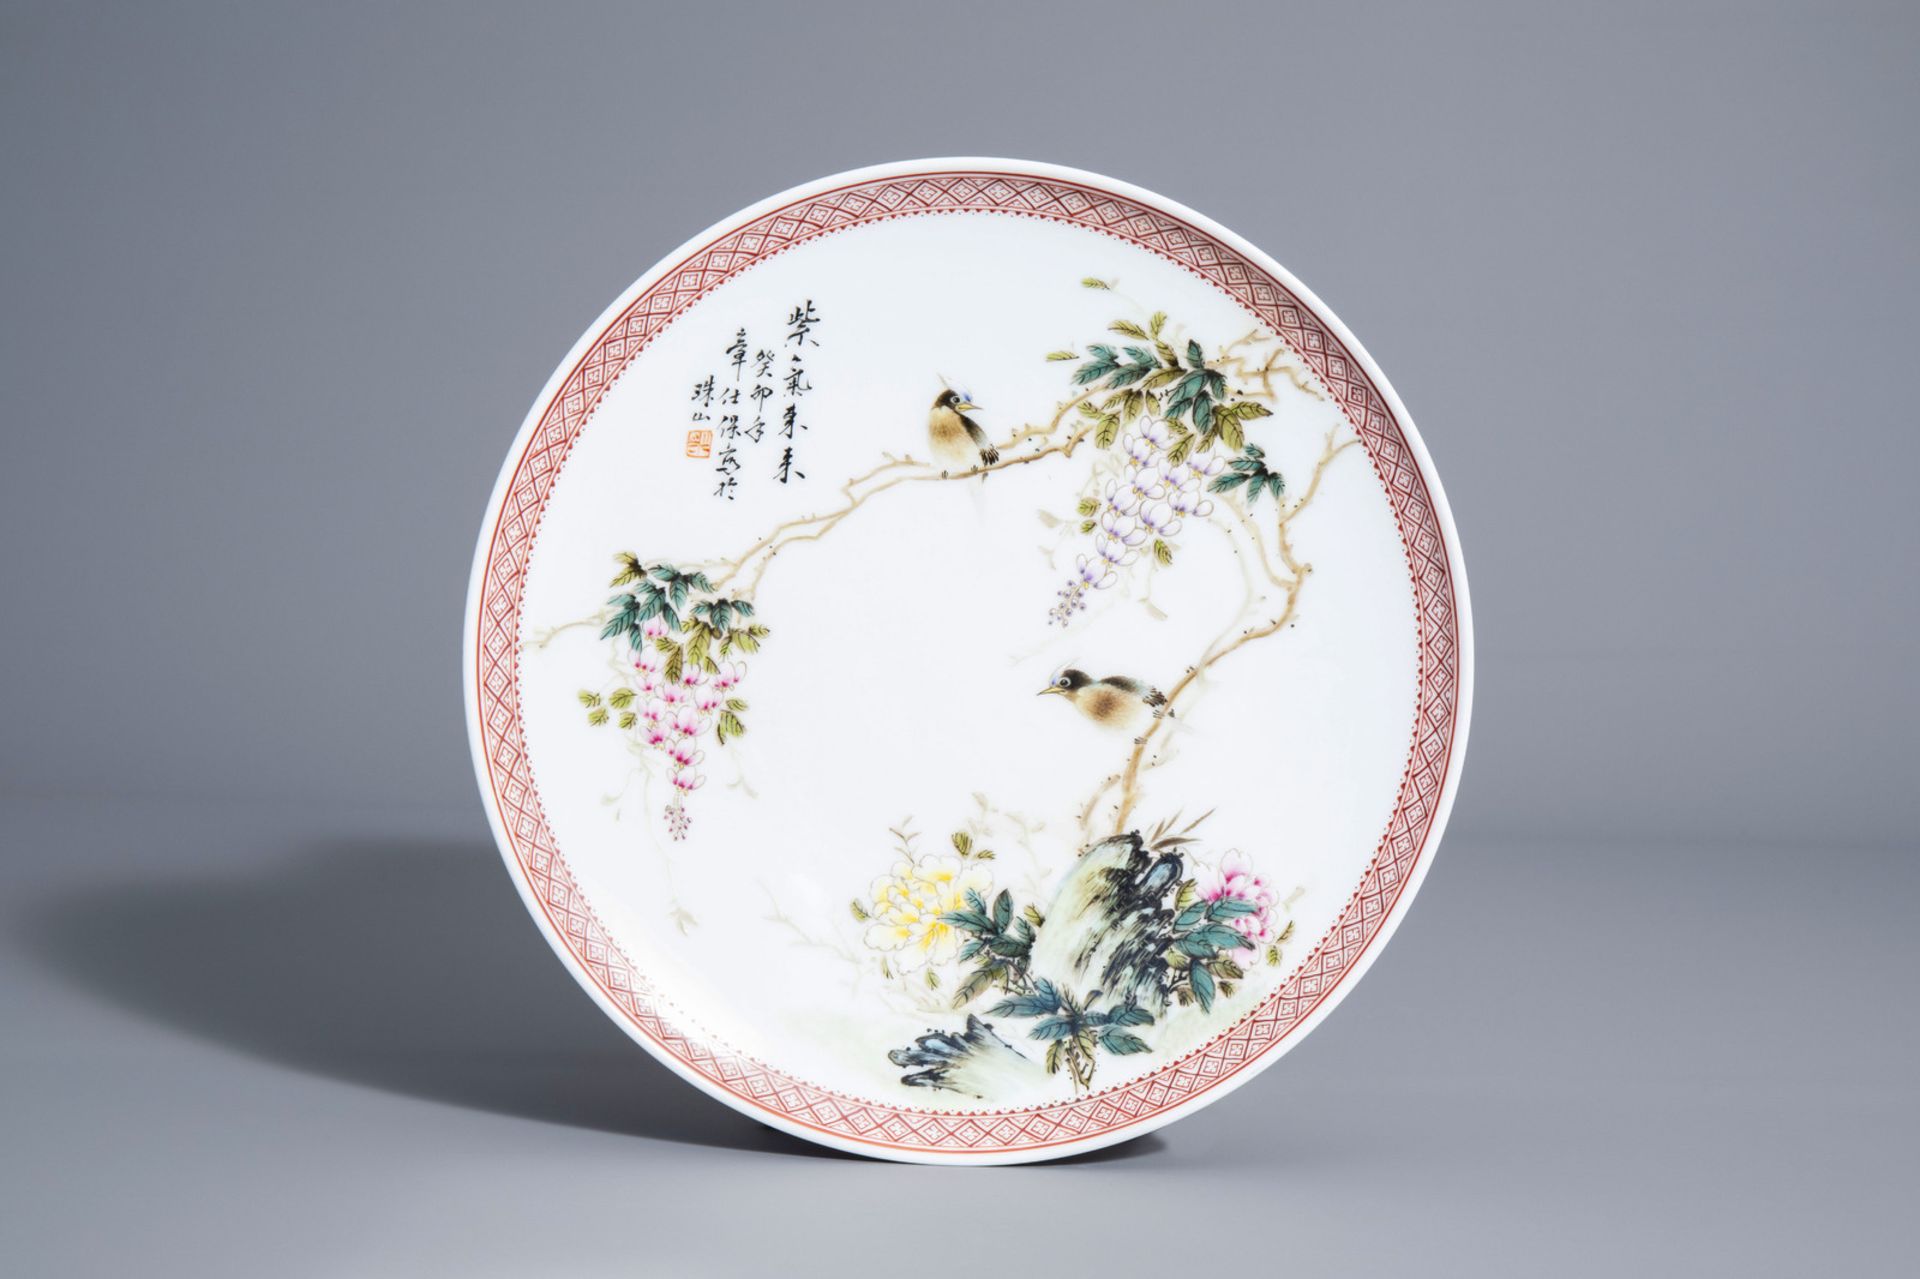 A Chinese famille rose charger with birds on blossoming branches, early People's Republic of China